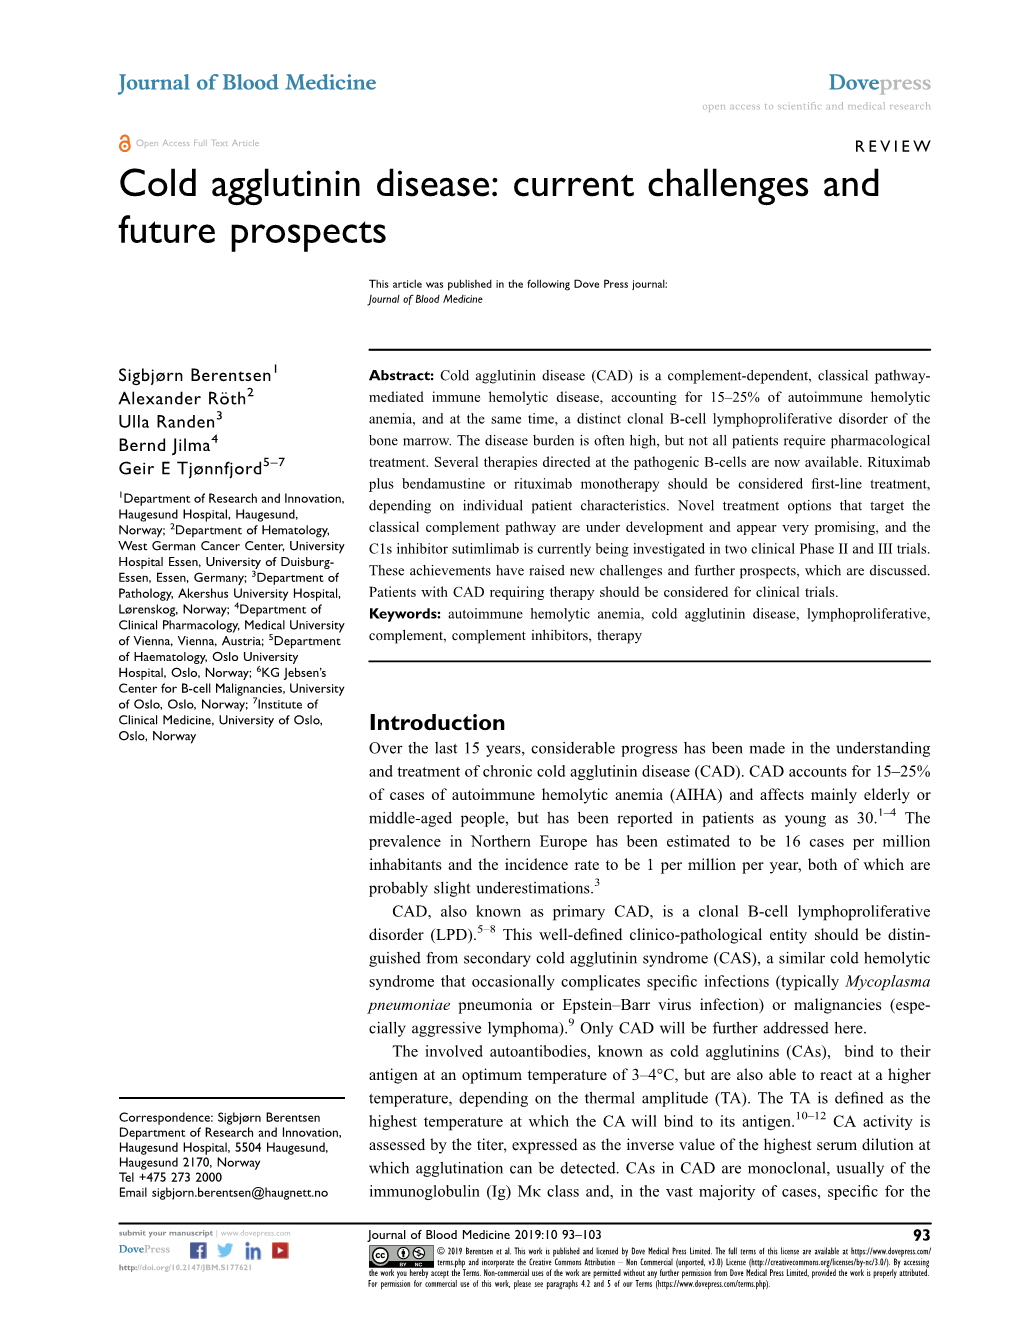 Cold Agglutinin Disease: Current Challenges and Future Prospects